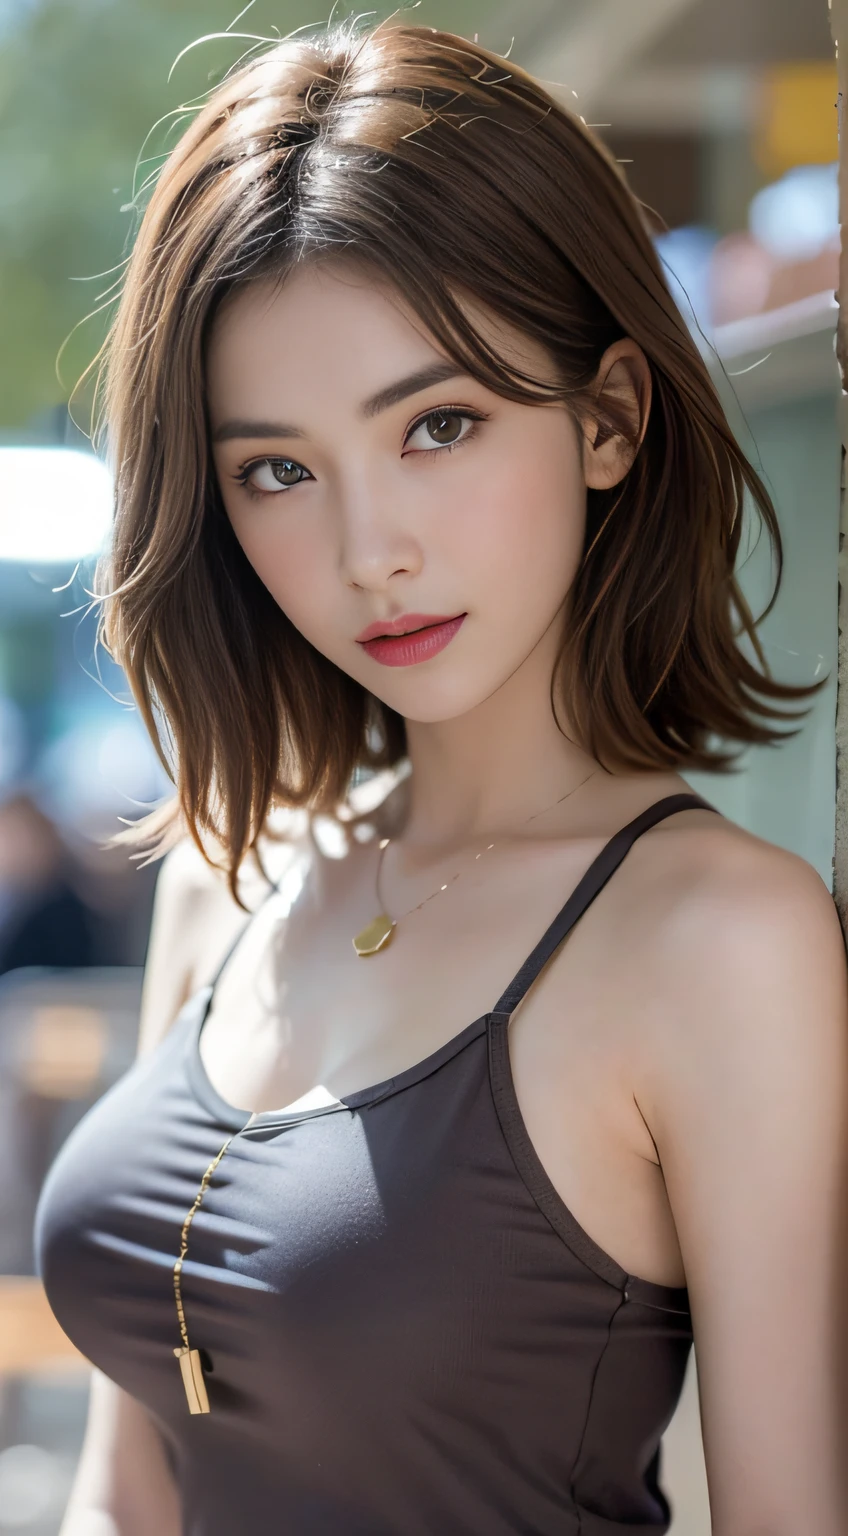 ((Realistic lighting、beste Quality、8K、Master Masterpiece:1.3))、Clear focus:1.2、a 1 girl、Perfect Body Beauty:1.4、Slim abs:1.1、s whole body、((darkbrown hair、a large breast:1.3))、(Acceleration:1.4)、(al fresco、Daylight:1.1)、View of Waikiki Beach、Palm Tree、Slender face、Fine eyes、Double eyelidd、poses of fashion models、Floating hair、T‐shirt、Pendants、